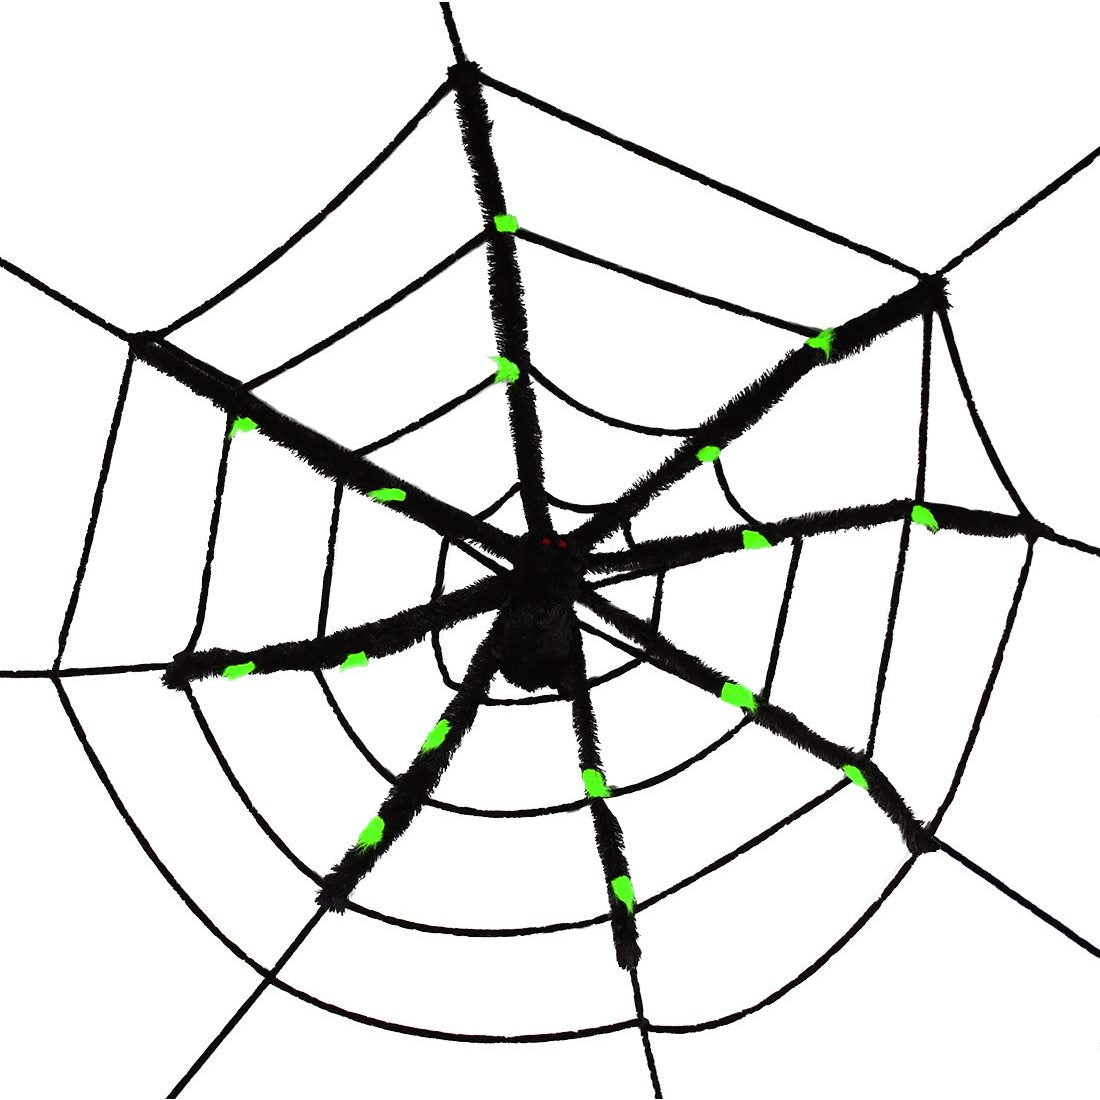 Giant Halloween Spider & Web with Green Accents